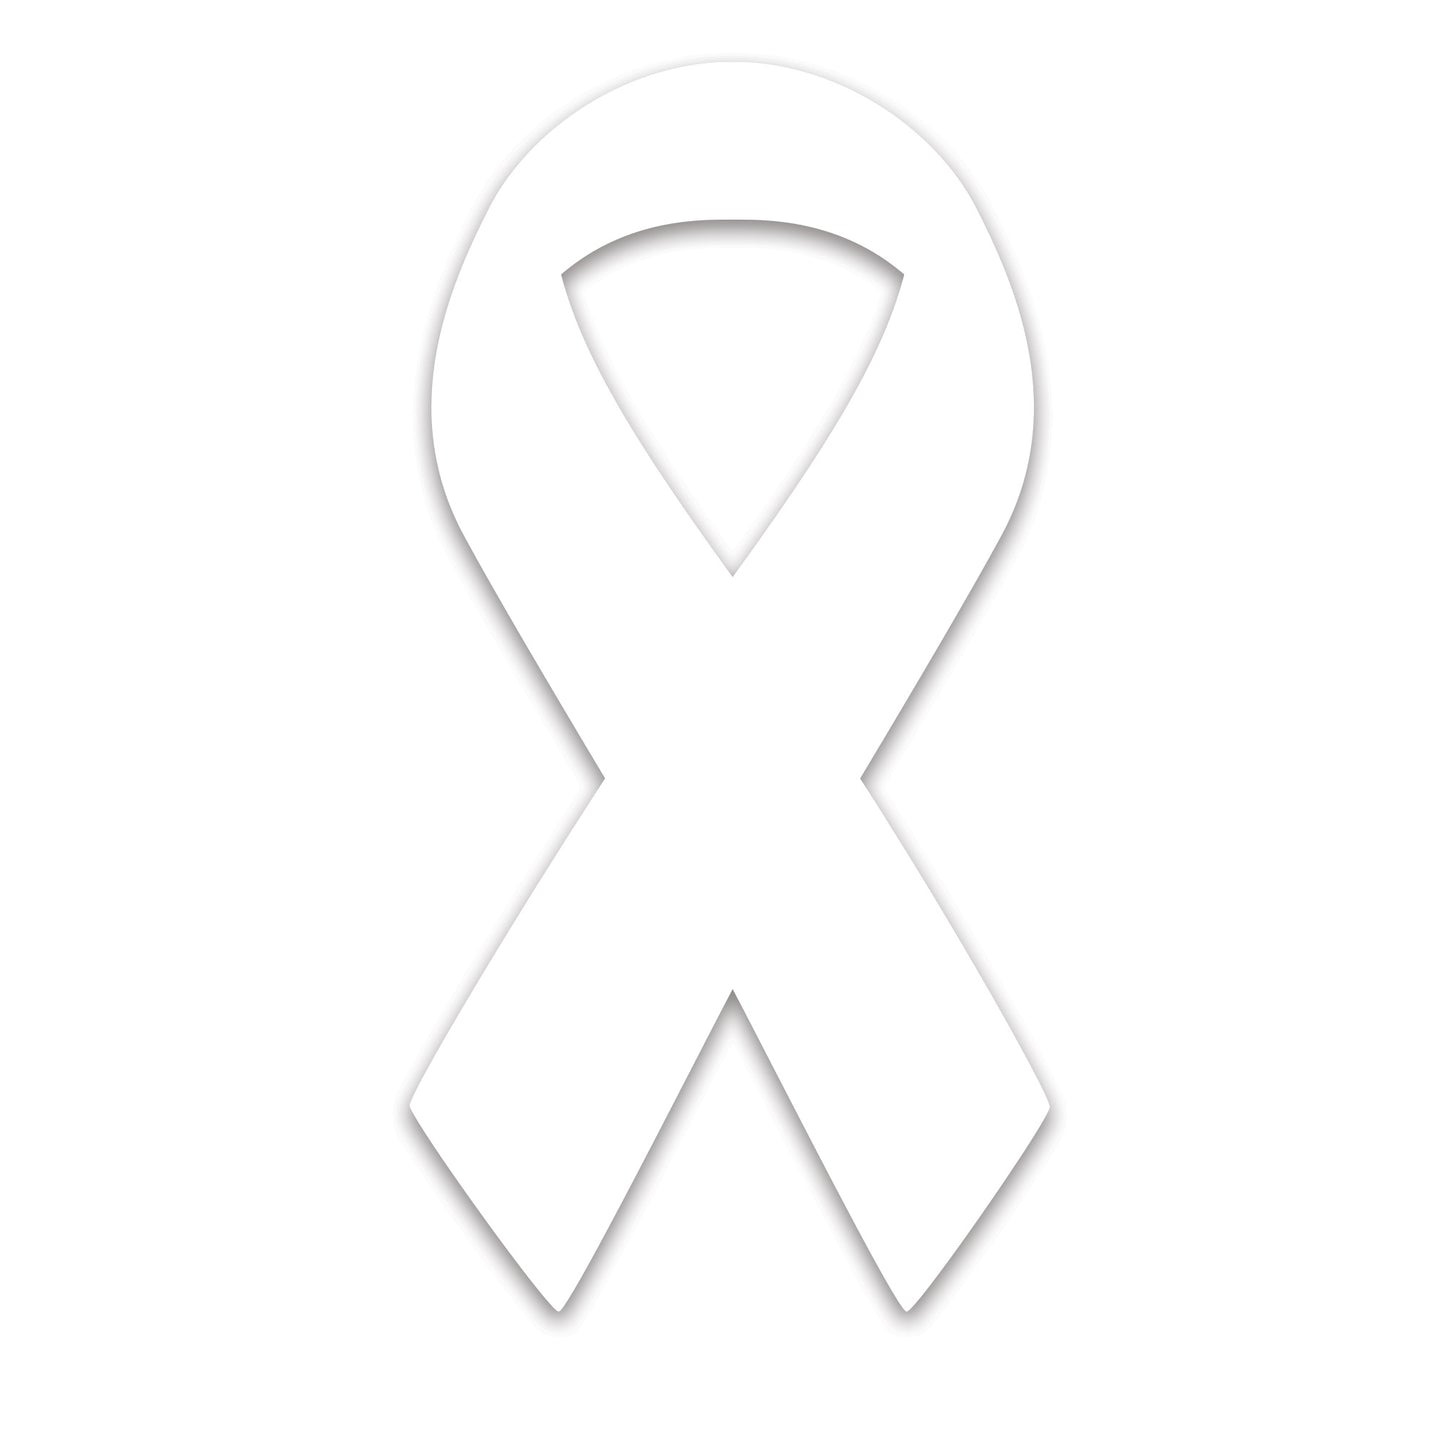 Lung Cancer Ribbon stickers